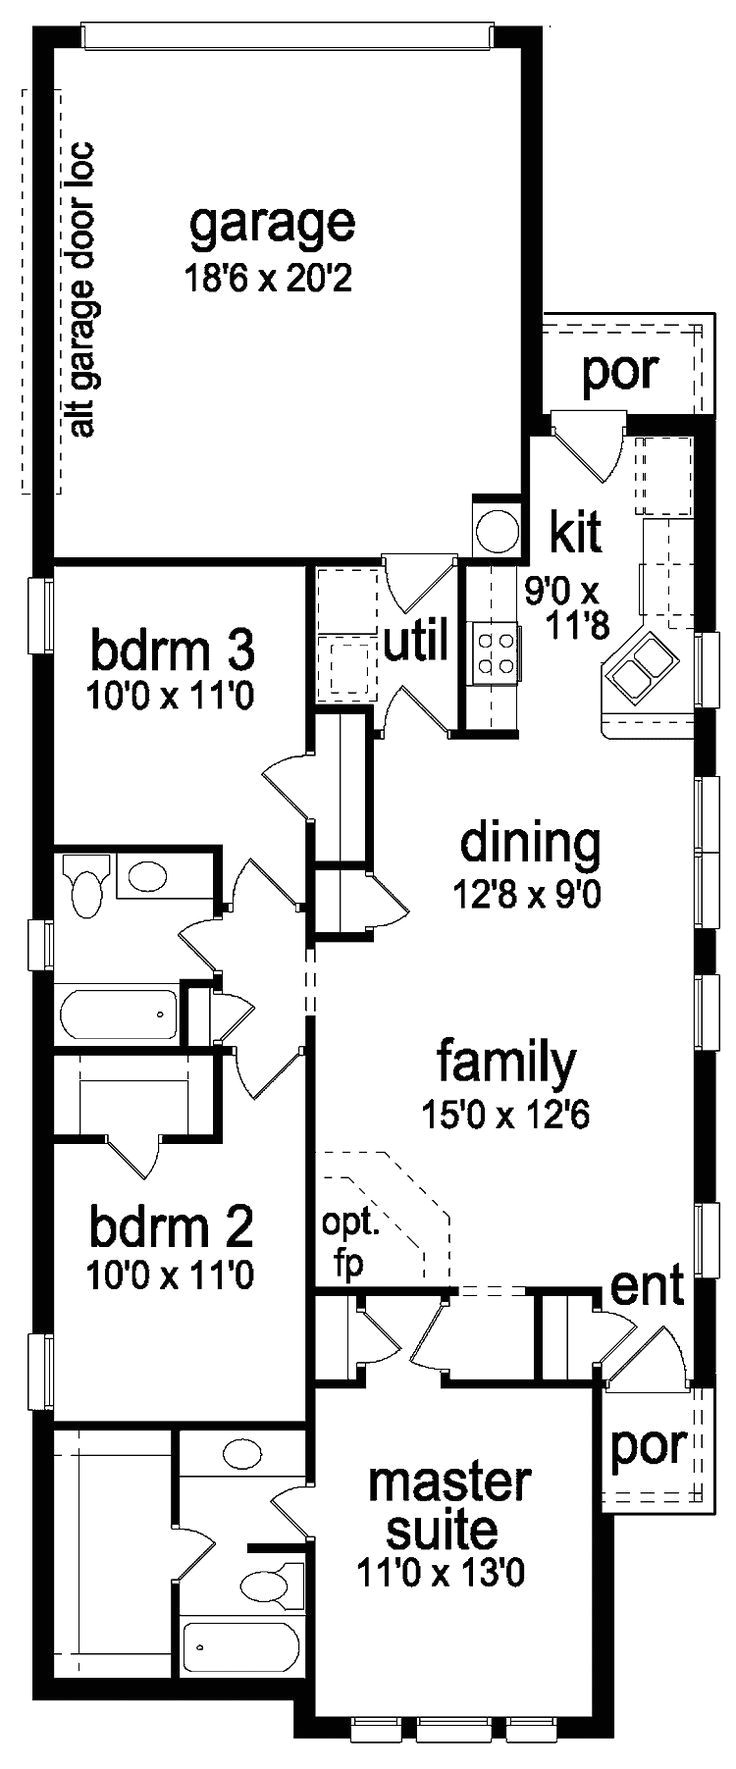 2 story house plans for narrow lots